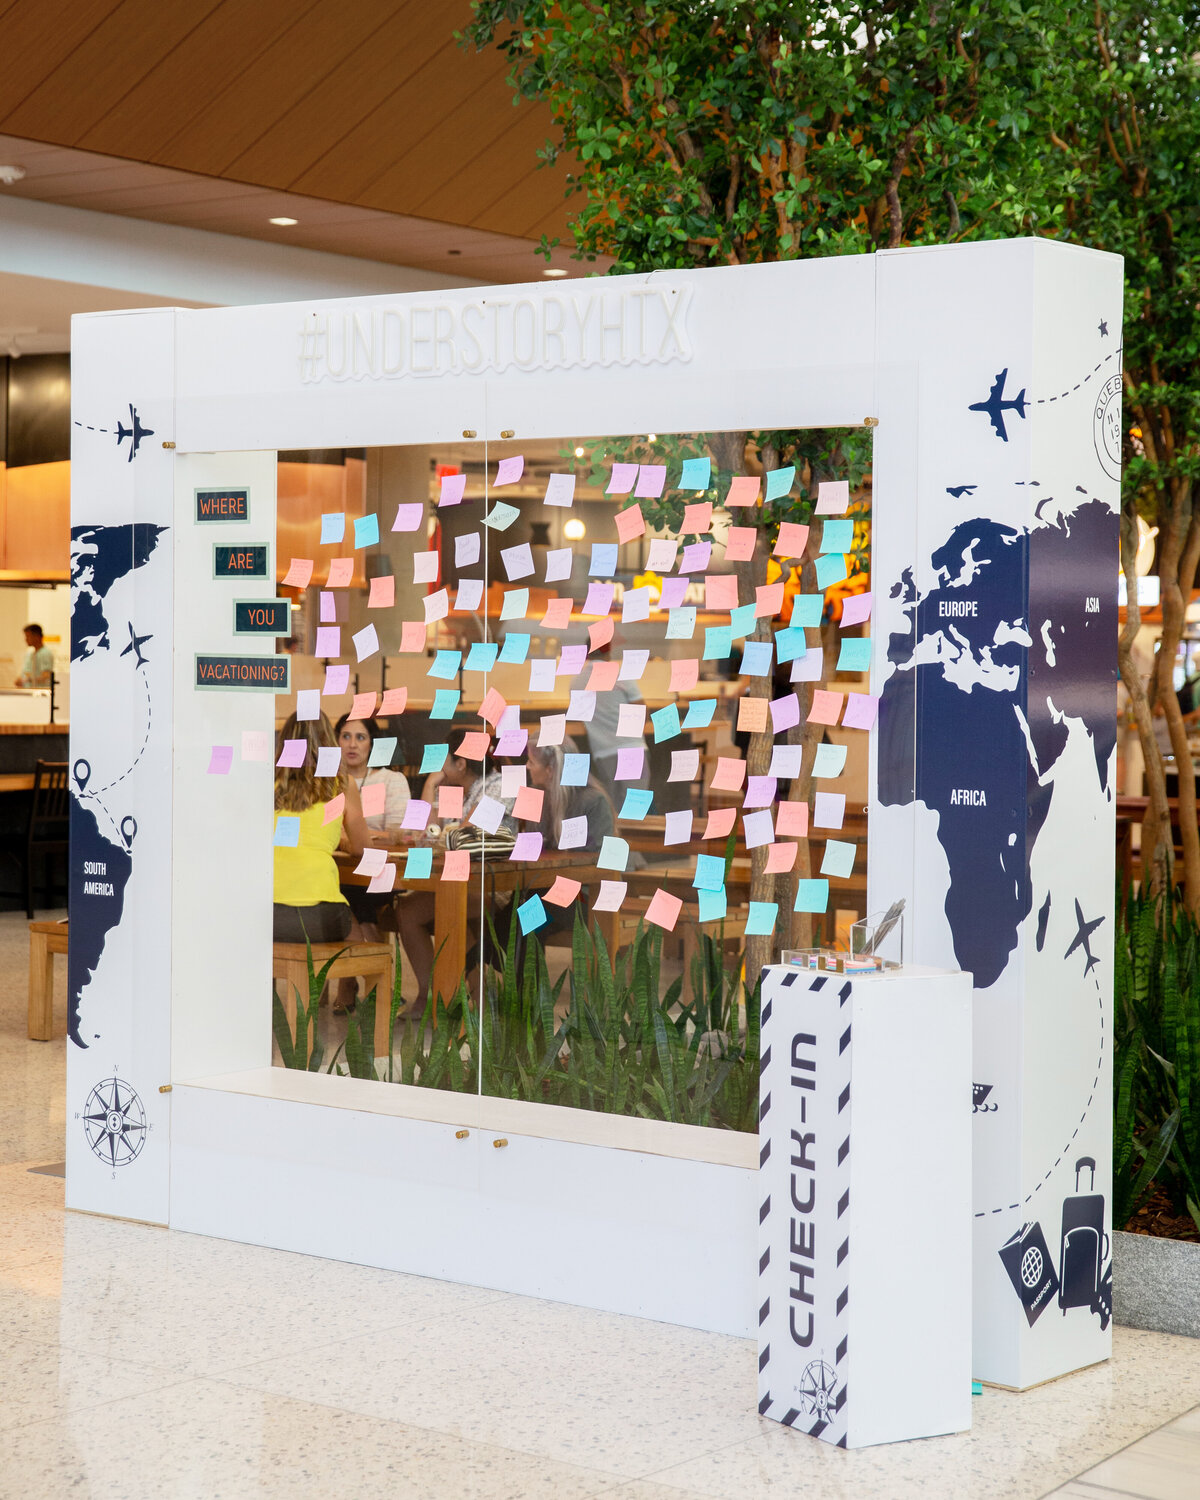 Understory Houston Texas world travel themed corporate event seating chart backdrop display